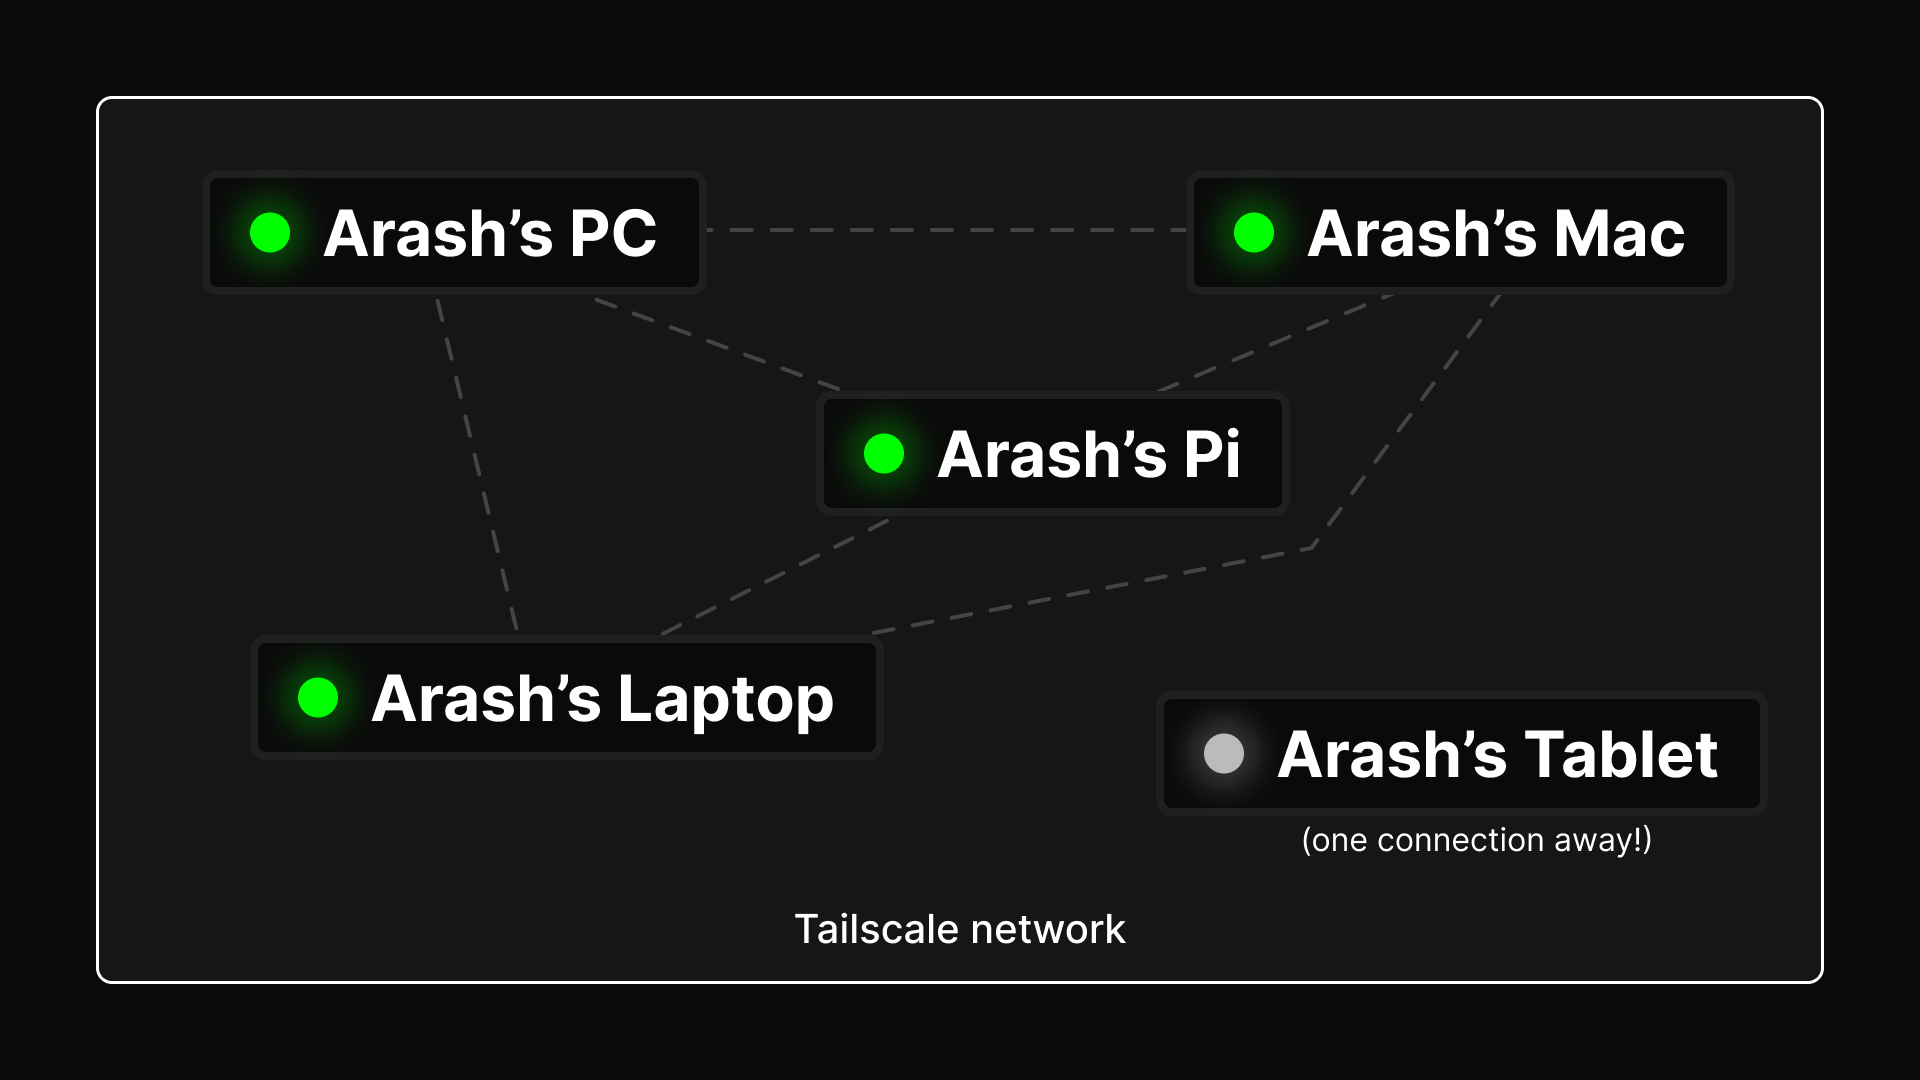 A graph-like network depicting five devices, Arash's PC, Arash's Mac, Arash's Pi, Arash's Laptop, and Arash's Tablet enveloped in a rectangle with the label 'Tailscale network' with lines interconnecting the devices. Arash's Tablet has a grey dot on it, indicating that it's offline from the network but can still be easily connected with one connection away.